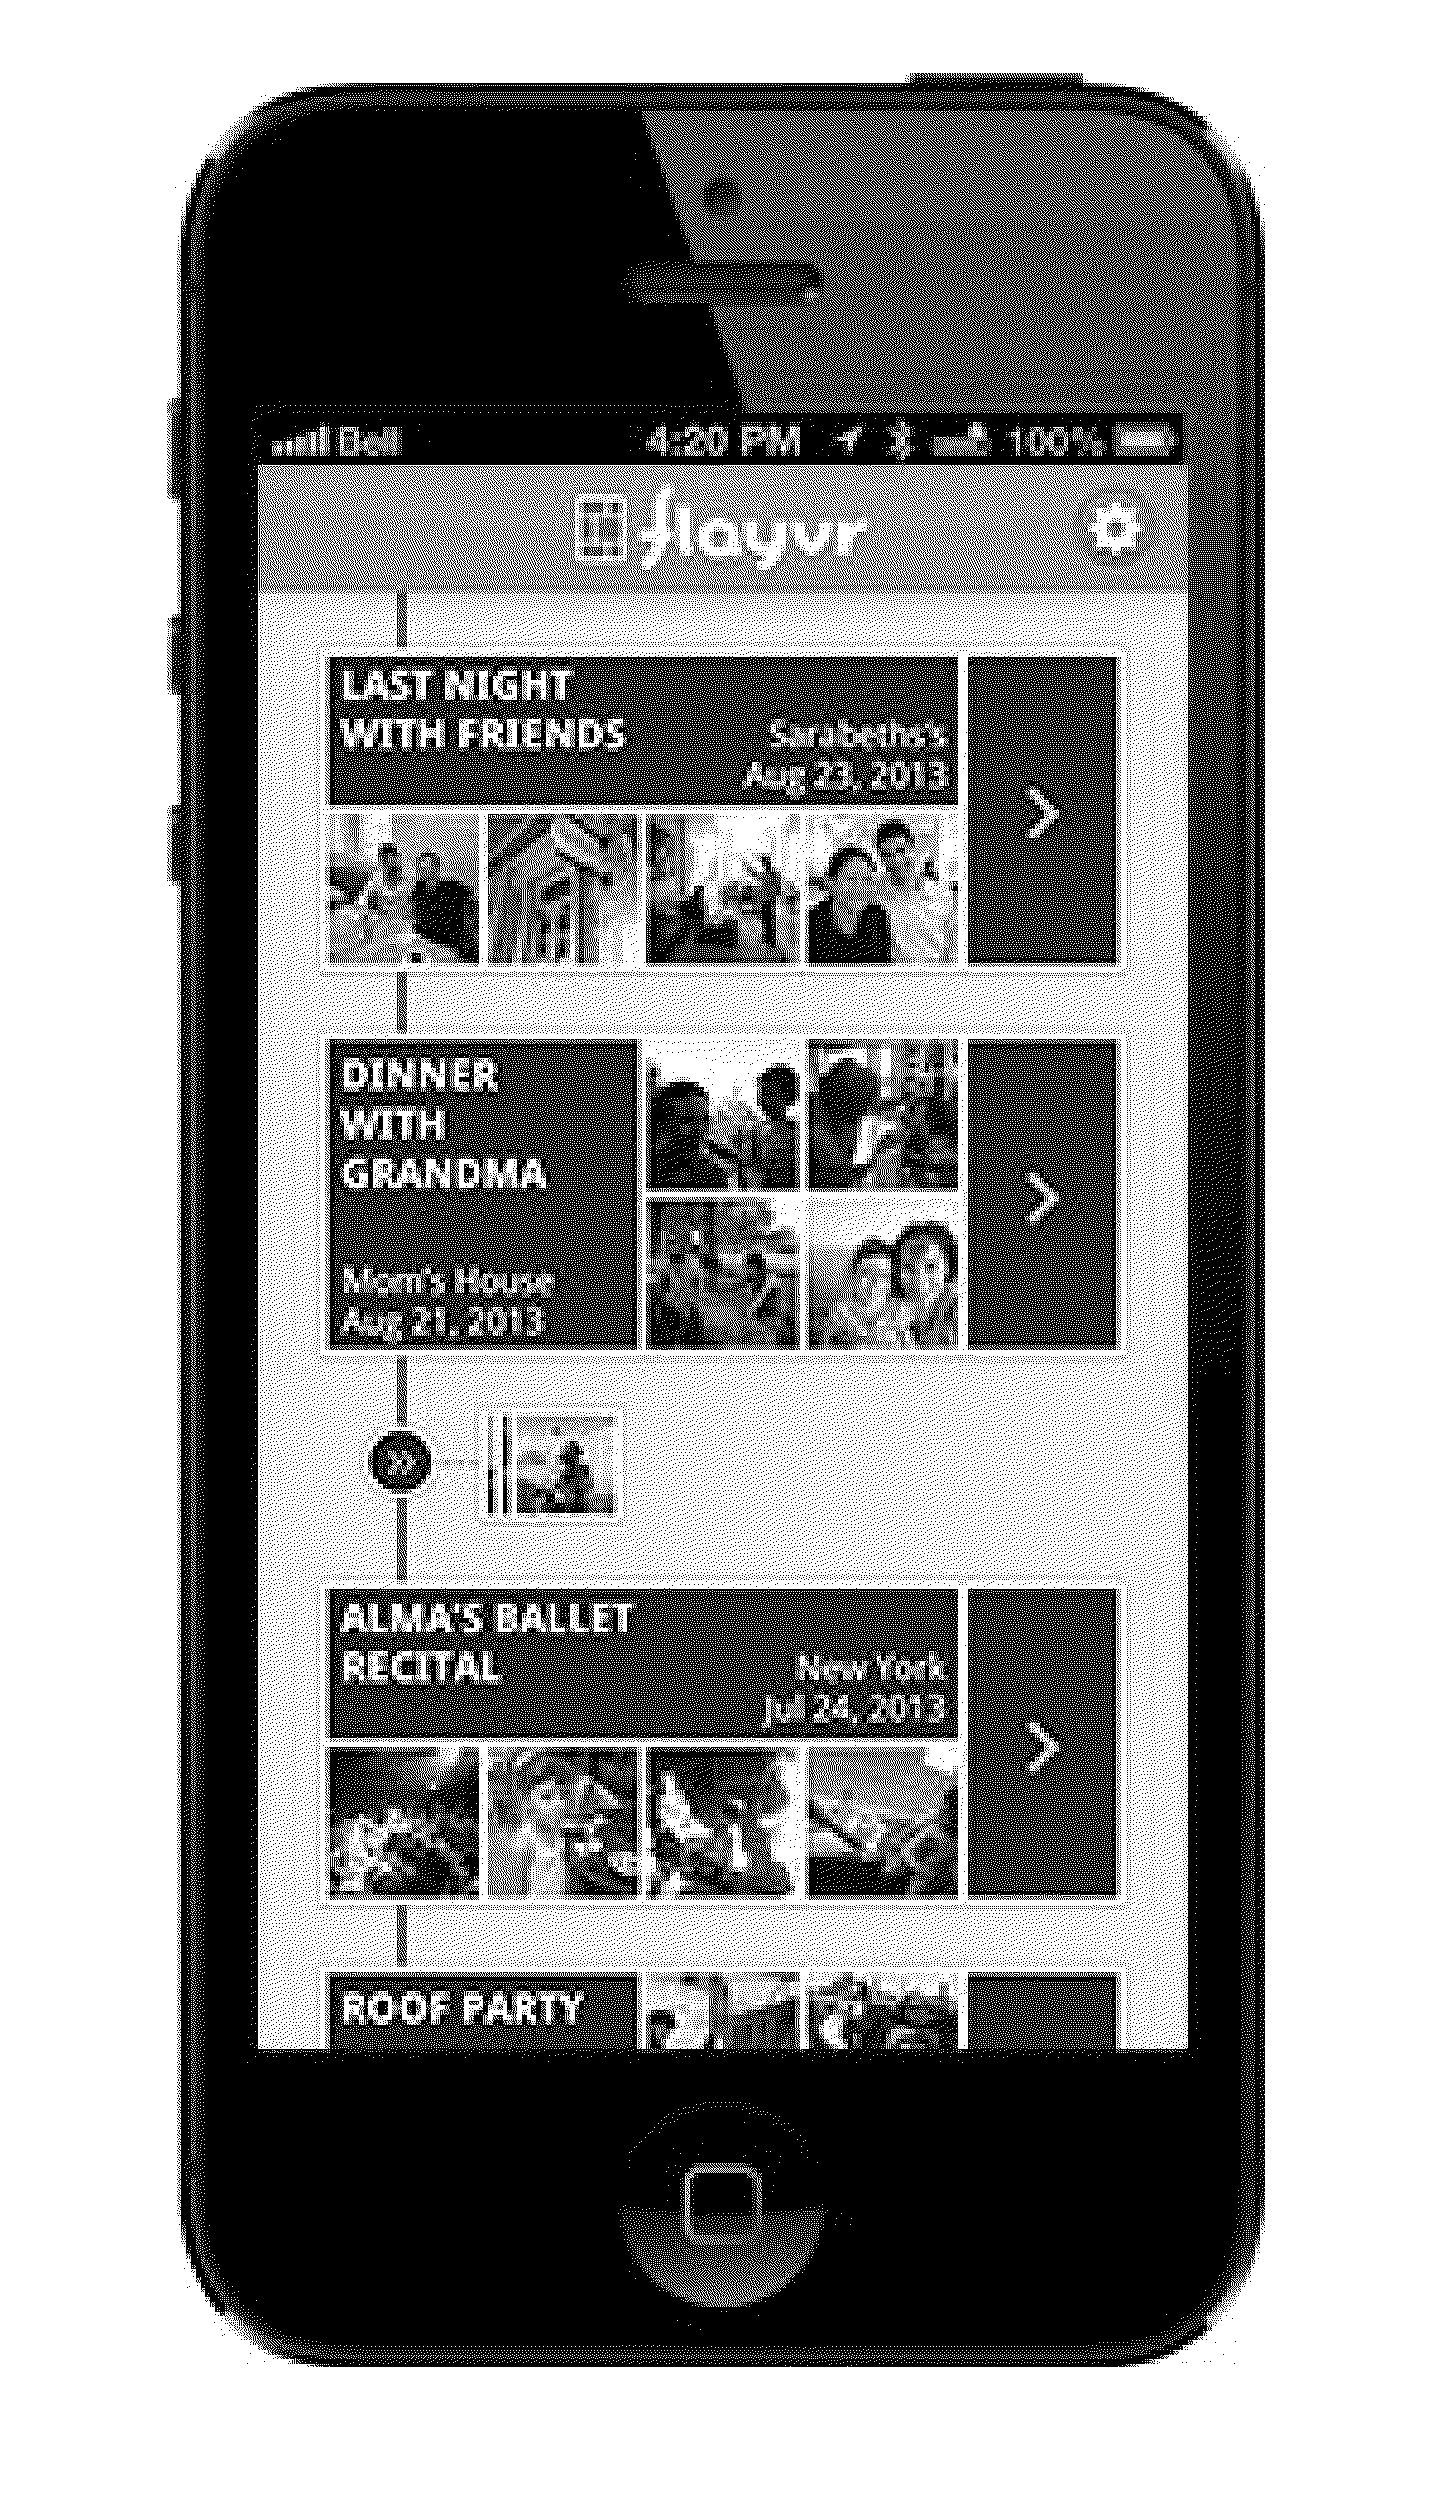 Systems and Methods for Collection-Based Multimedia Data Packaging and Display